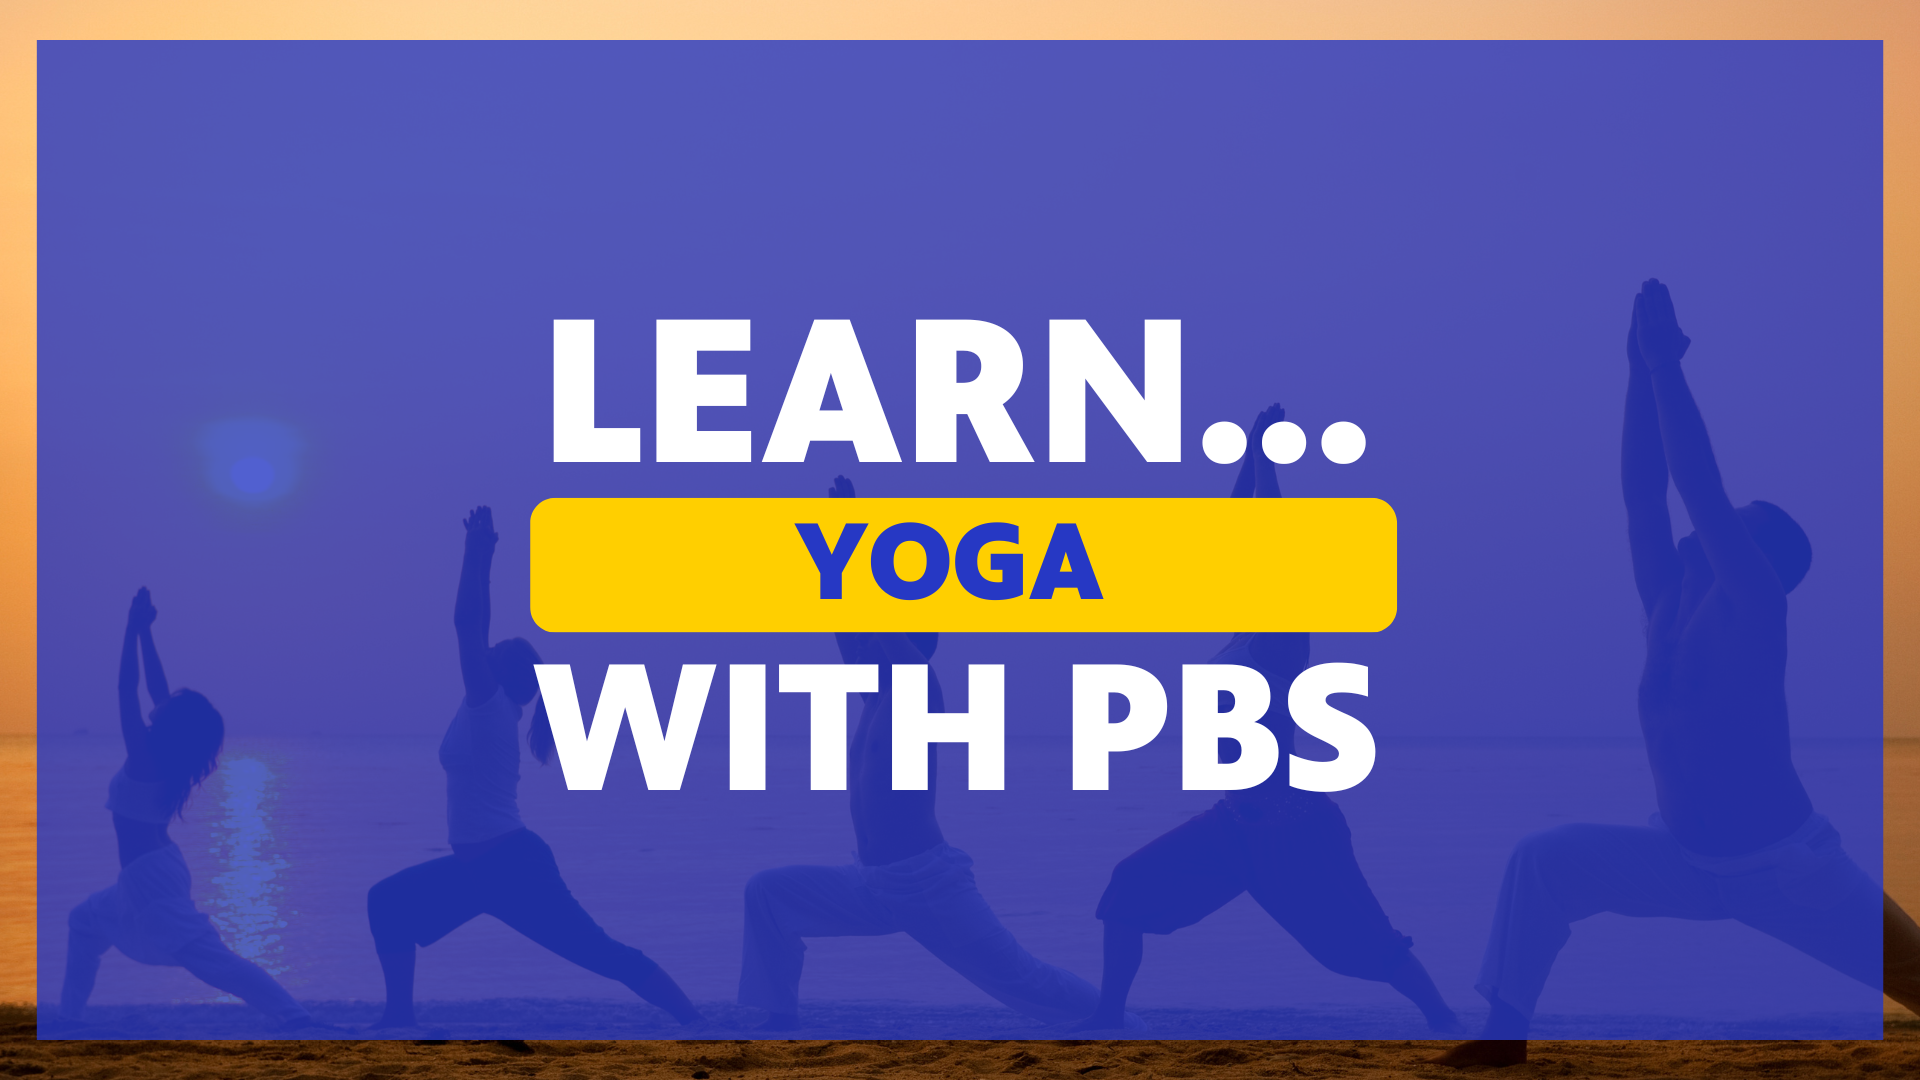 Learn Yoga With PBS